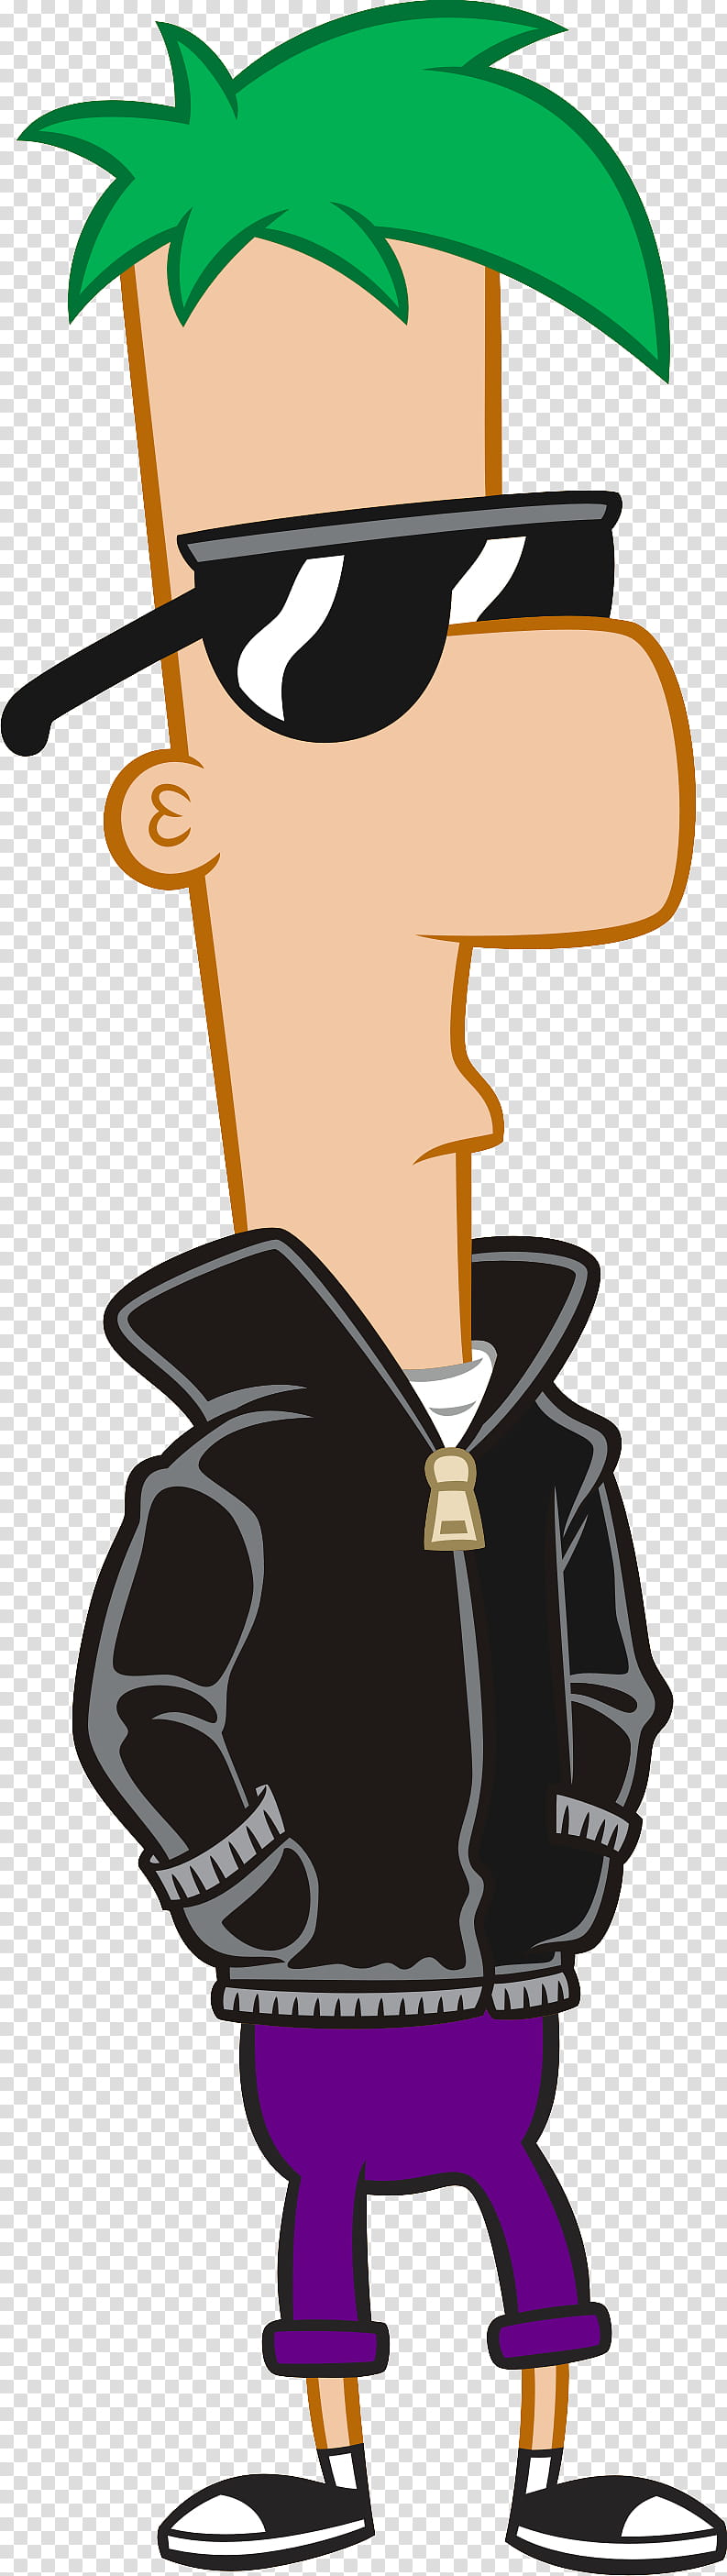 Ferb from Phineas & Ferb illustration transparent background PNG clipart